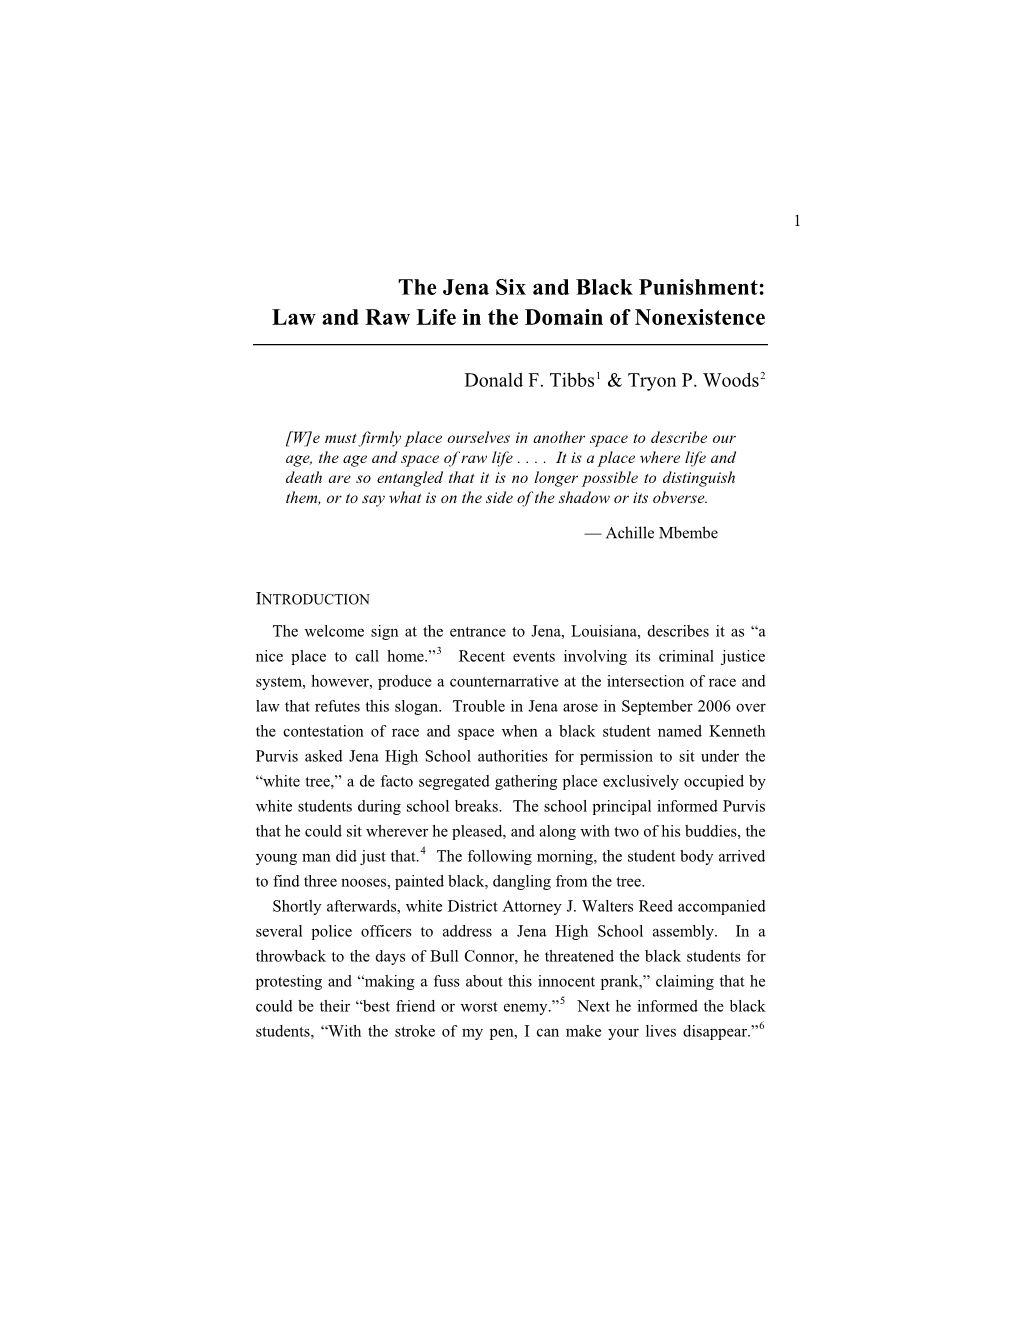 THE JENA 6 and BLACK PUNISHMENT: Law and Raw Life in the Domain of Non-Existence